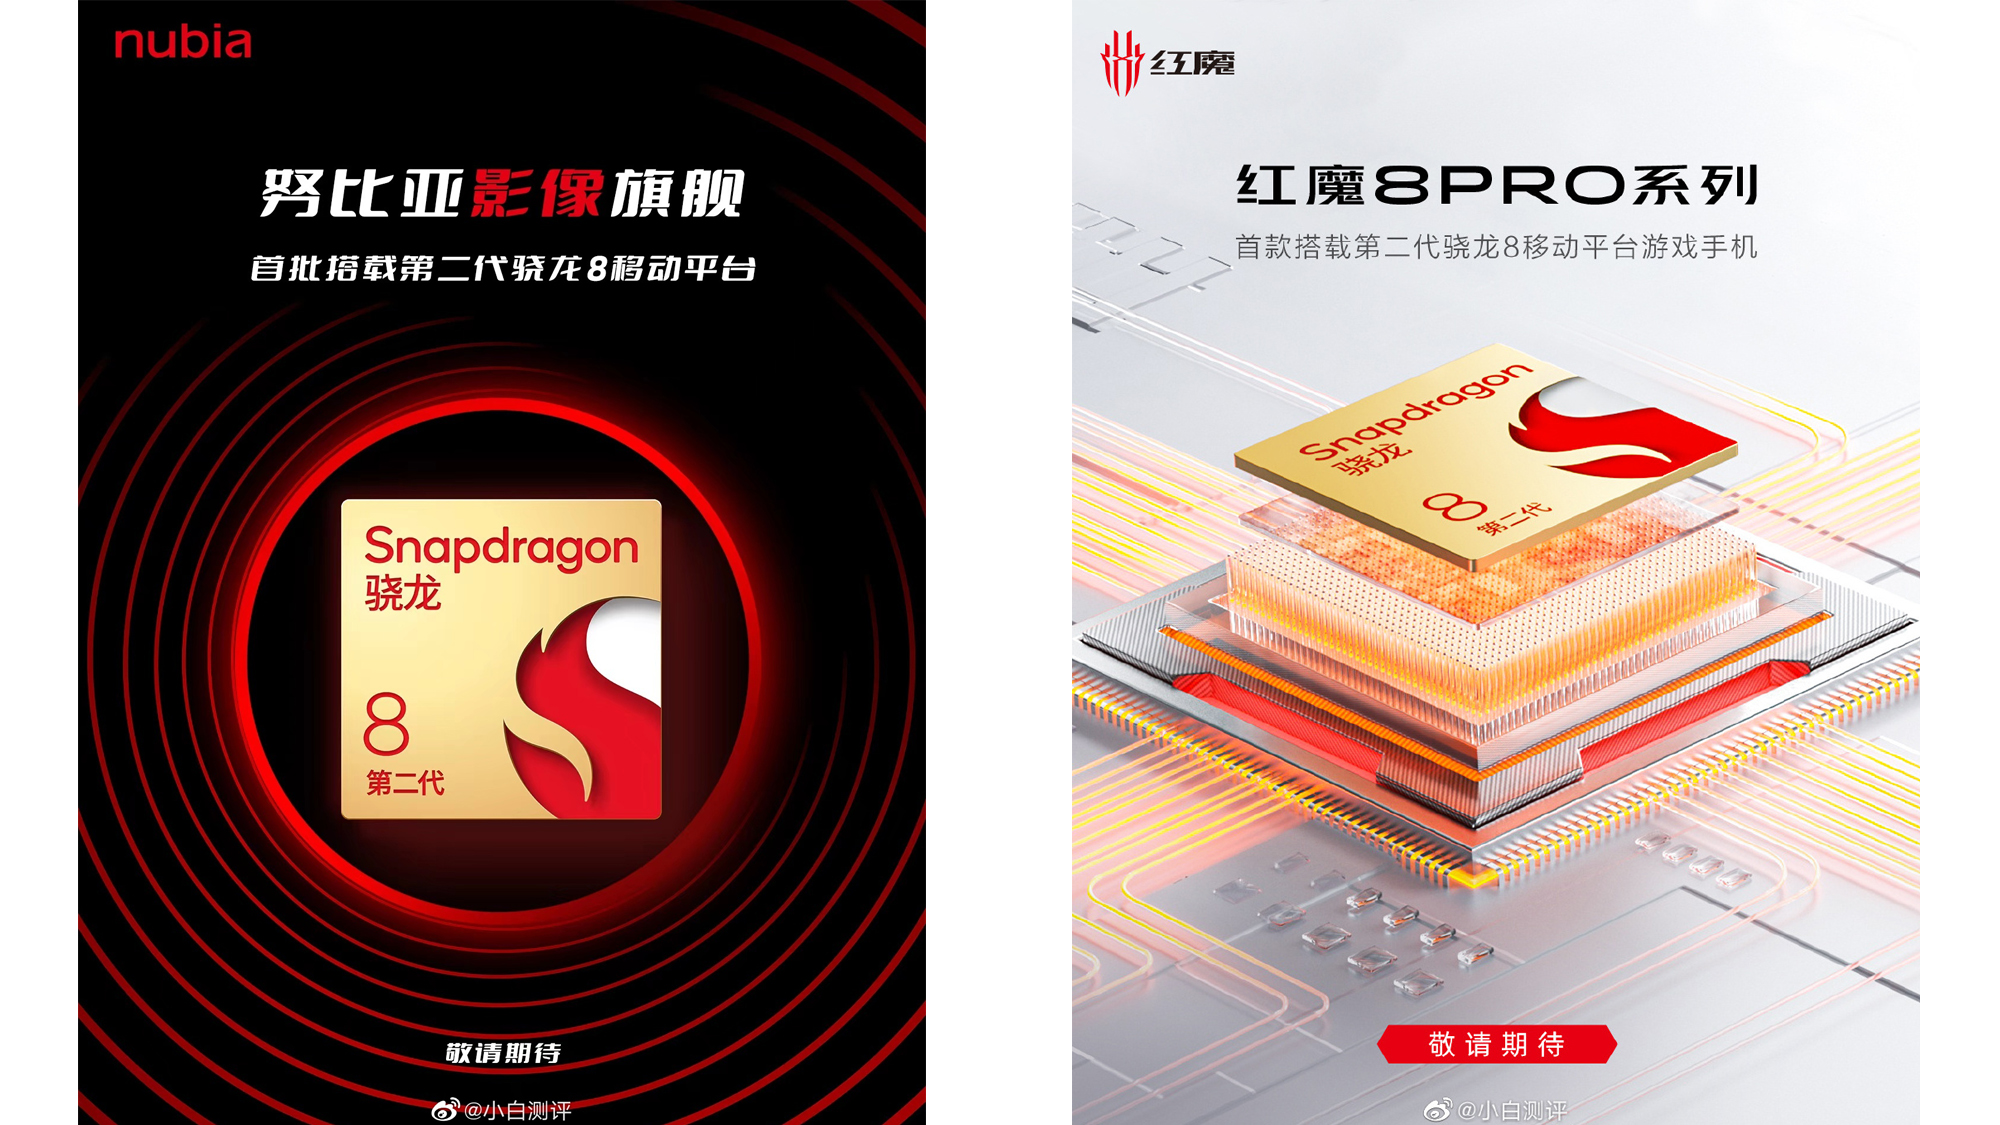 Snapdragon 8 Gen 2 confirmation posters from Nubia and Red Magic on Weibo